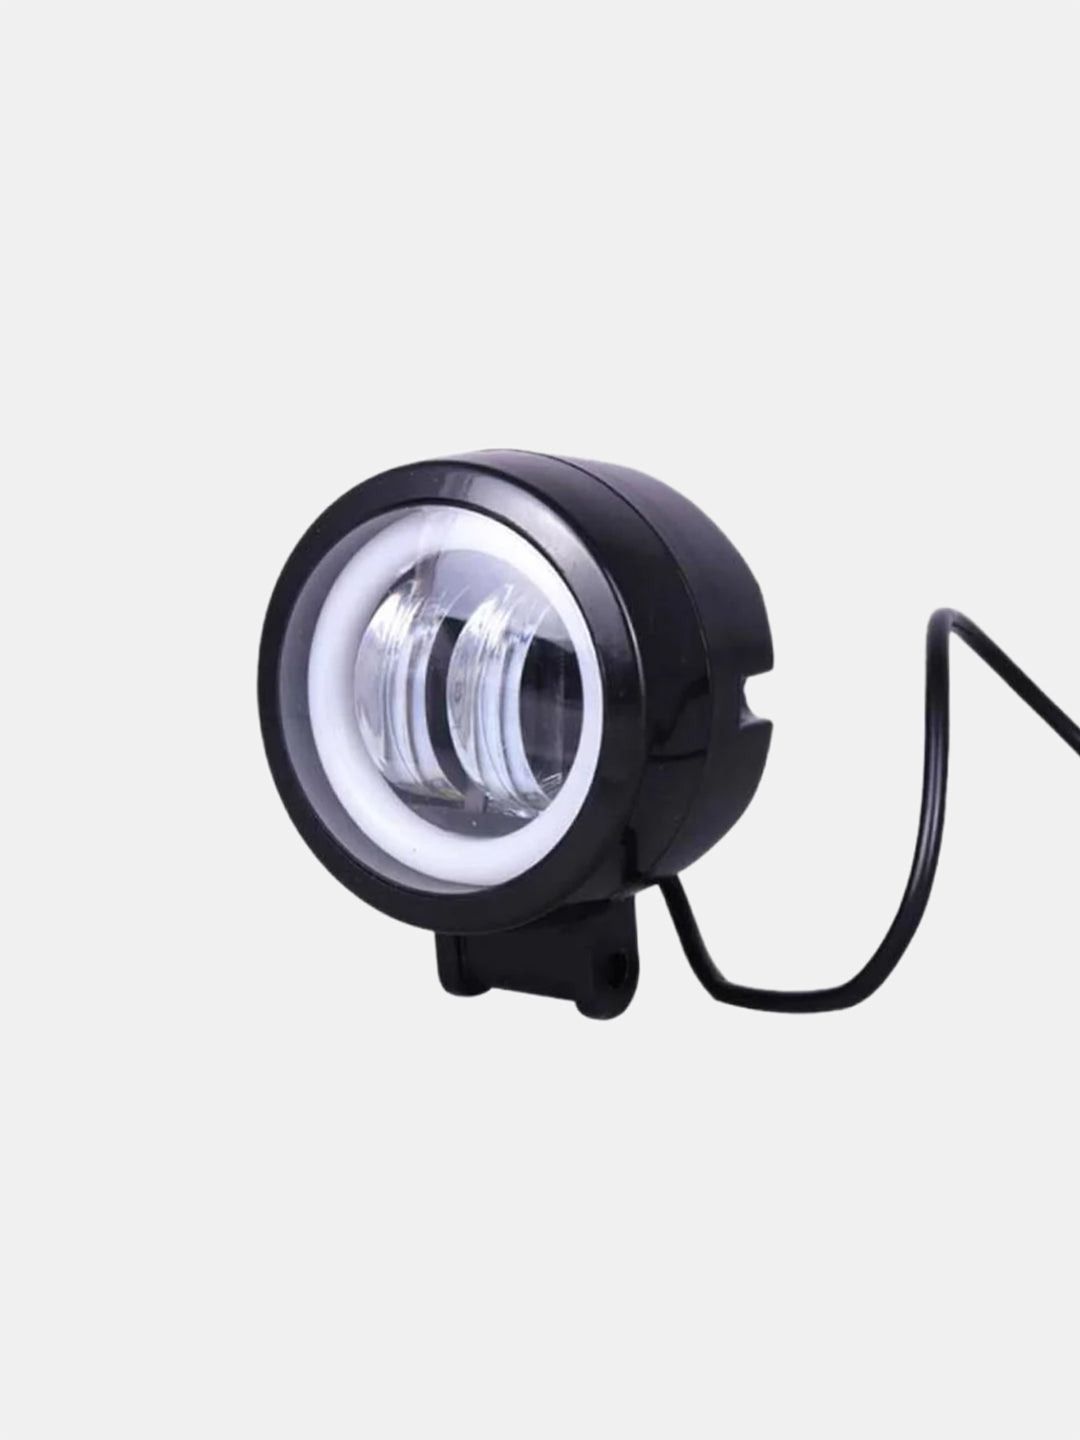 Normal Harley Round Fog Light With Ring